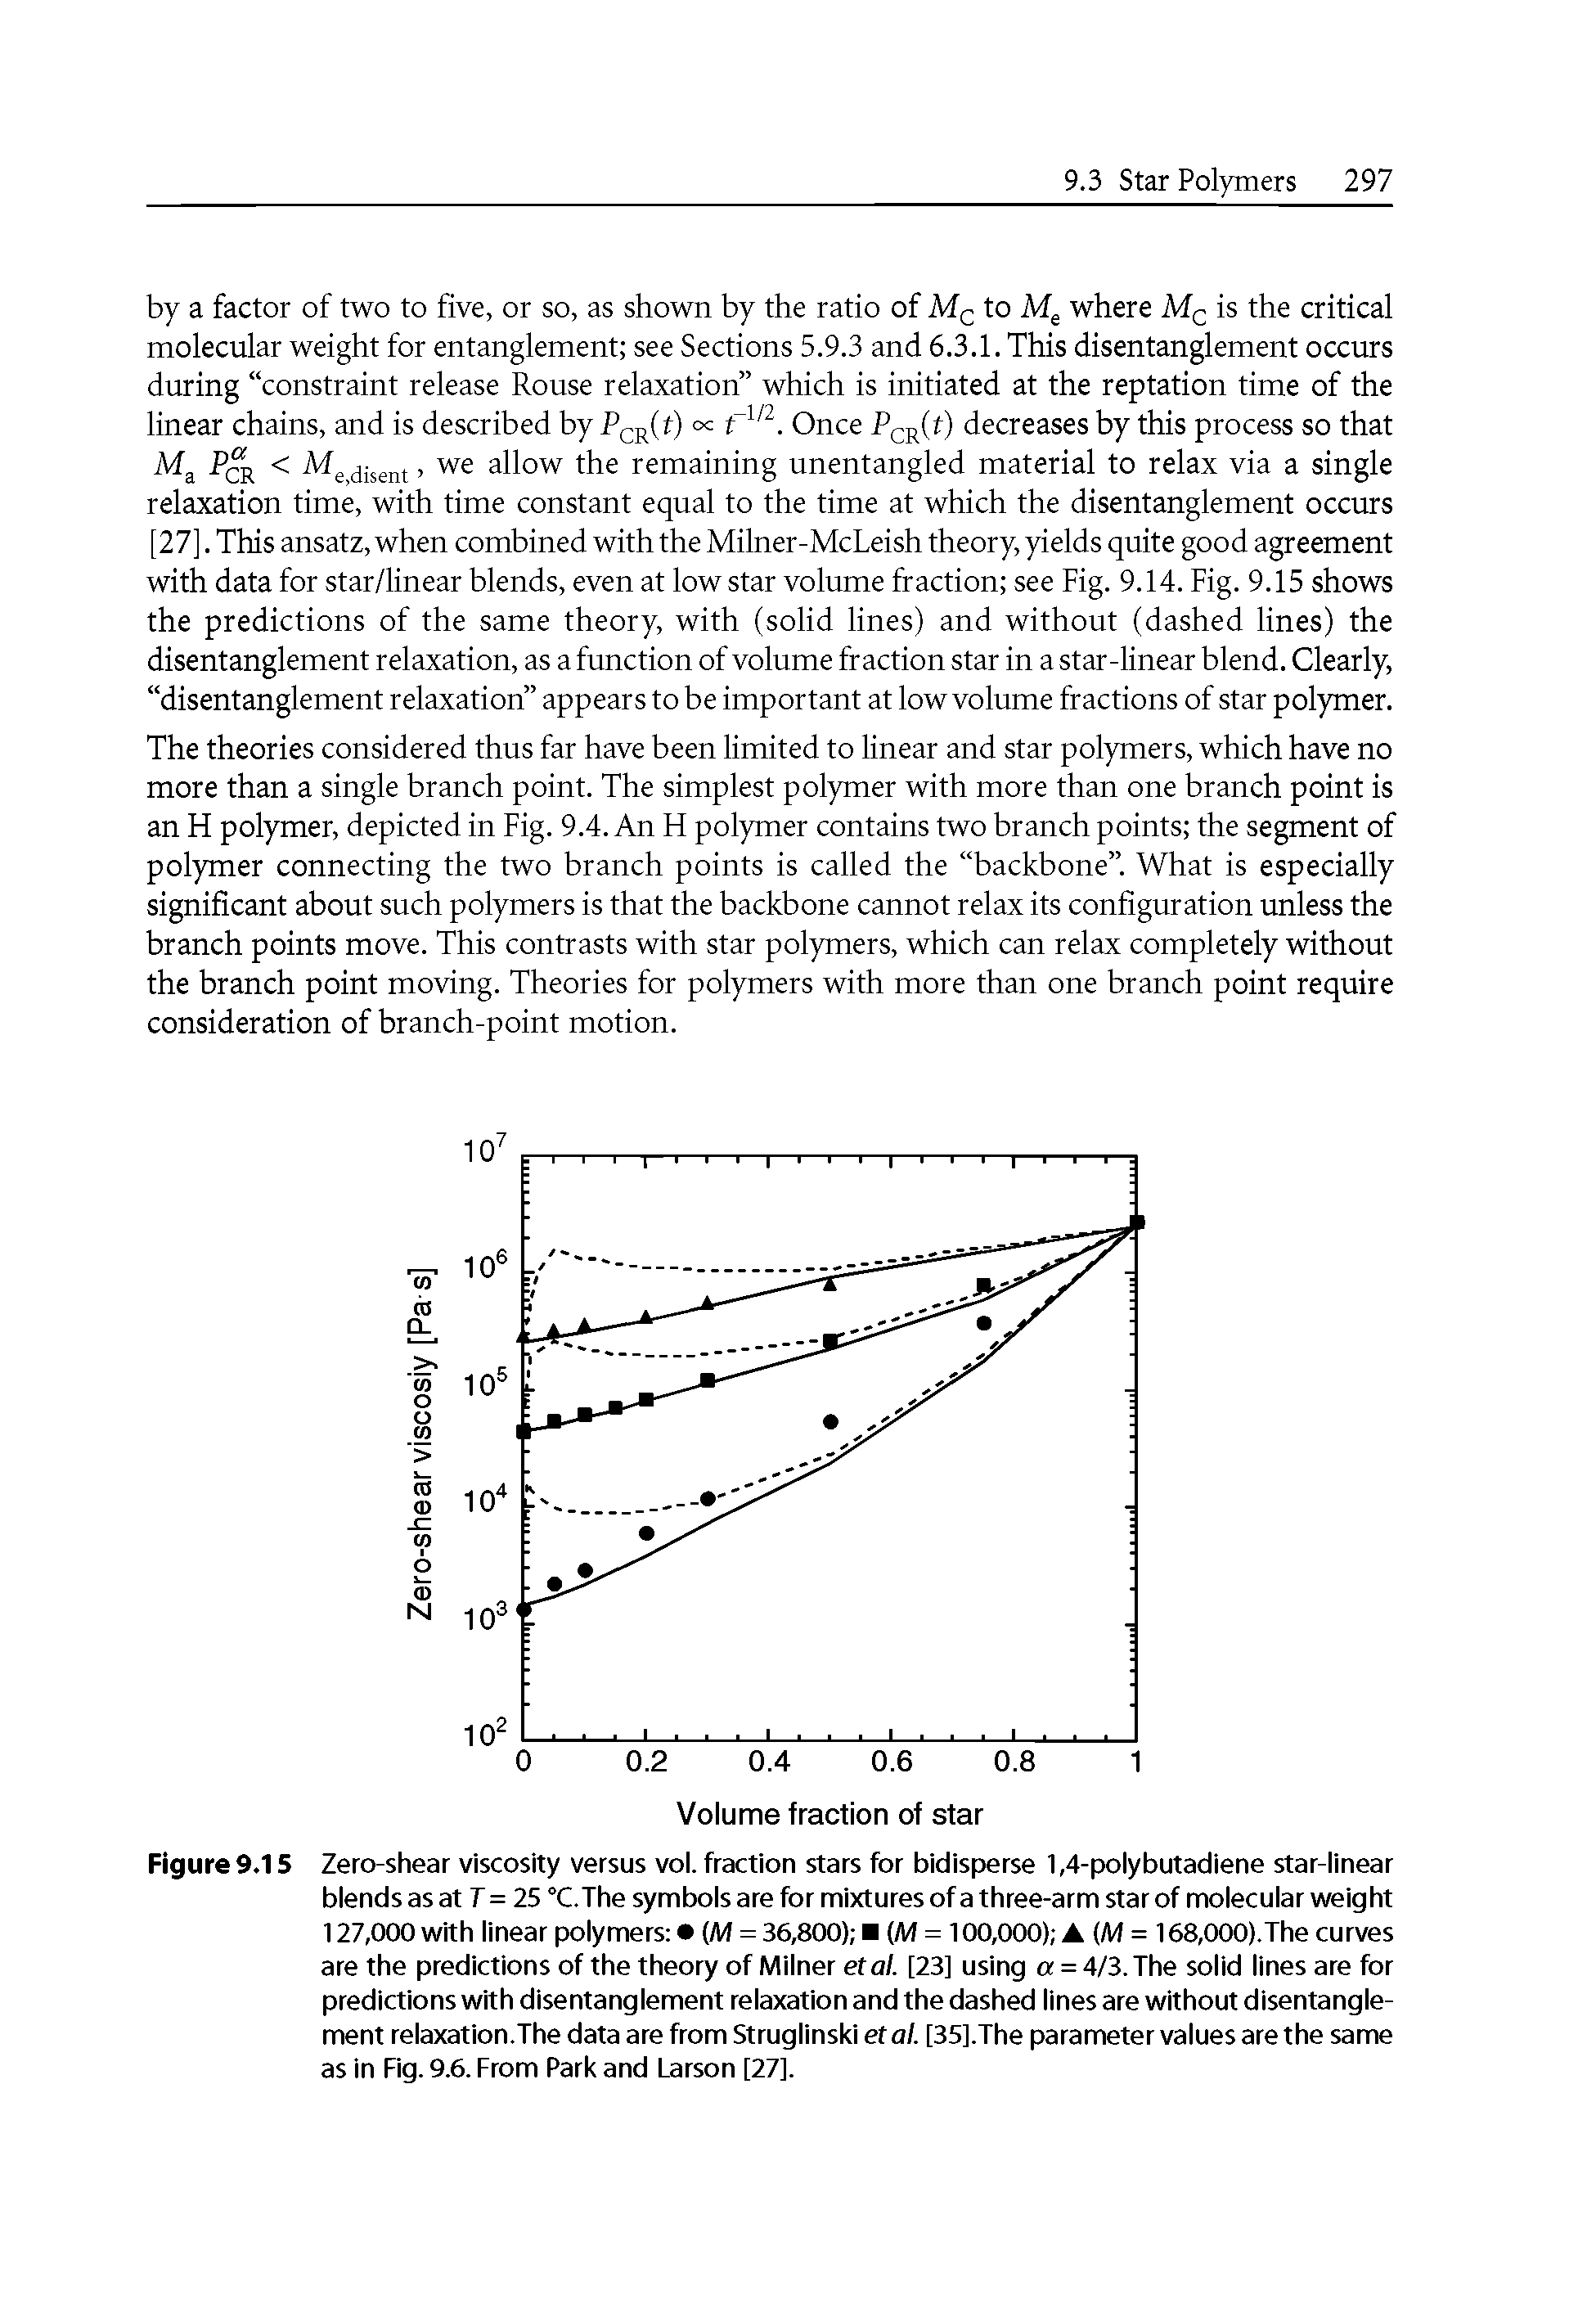 Figure 9.15 Zero-shear viscosity versus vol. fraction stars for bidisperse 1,4-poly butadiene star-linear blends as at 7= 25 "C.The symbols are for mixtures of a three-arm star of molecular weight 127,000 with linear polymers (M = 36,800) (M = 100,000) A(M = 68,000).The curves are the predictions of the theory of Milner etal. [23] using a = 4/3. The solid lines are for predictions with disentanglement relaxation and the dashed lines are without disentanglement relaxation.The data are from Struglinski etal. [35].The parameter values are the same as in Fig. 9.6. From Park and Larson [27].